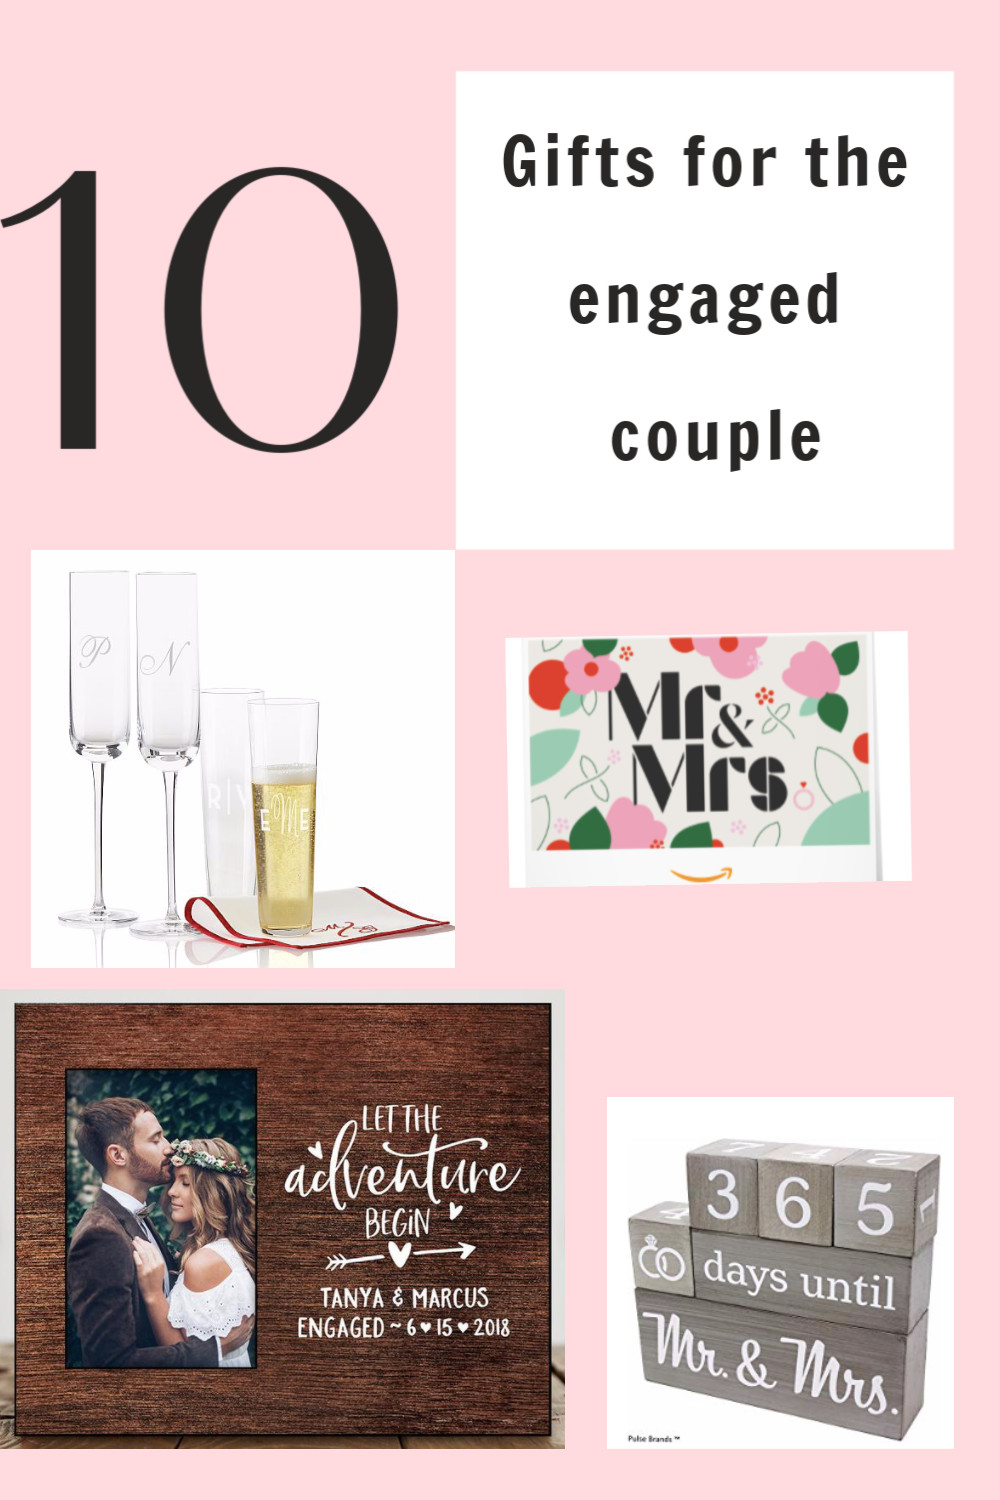 Gift Ideas For Engaged Couple
 10 Cute Gift Ideas for the Engaged Couple